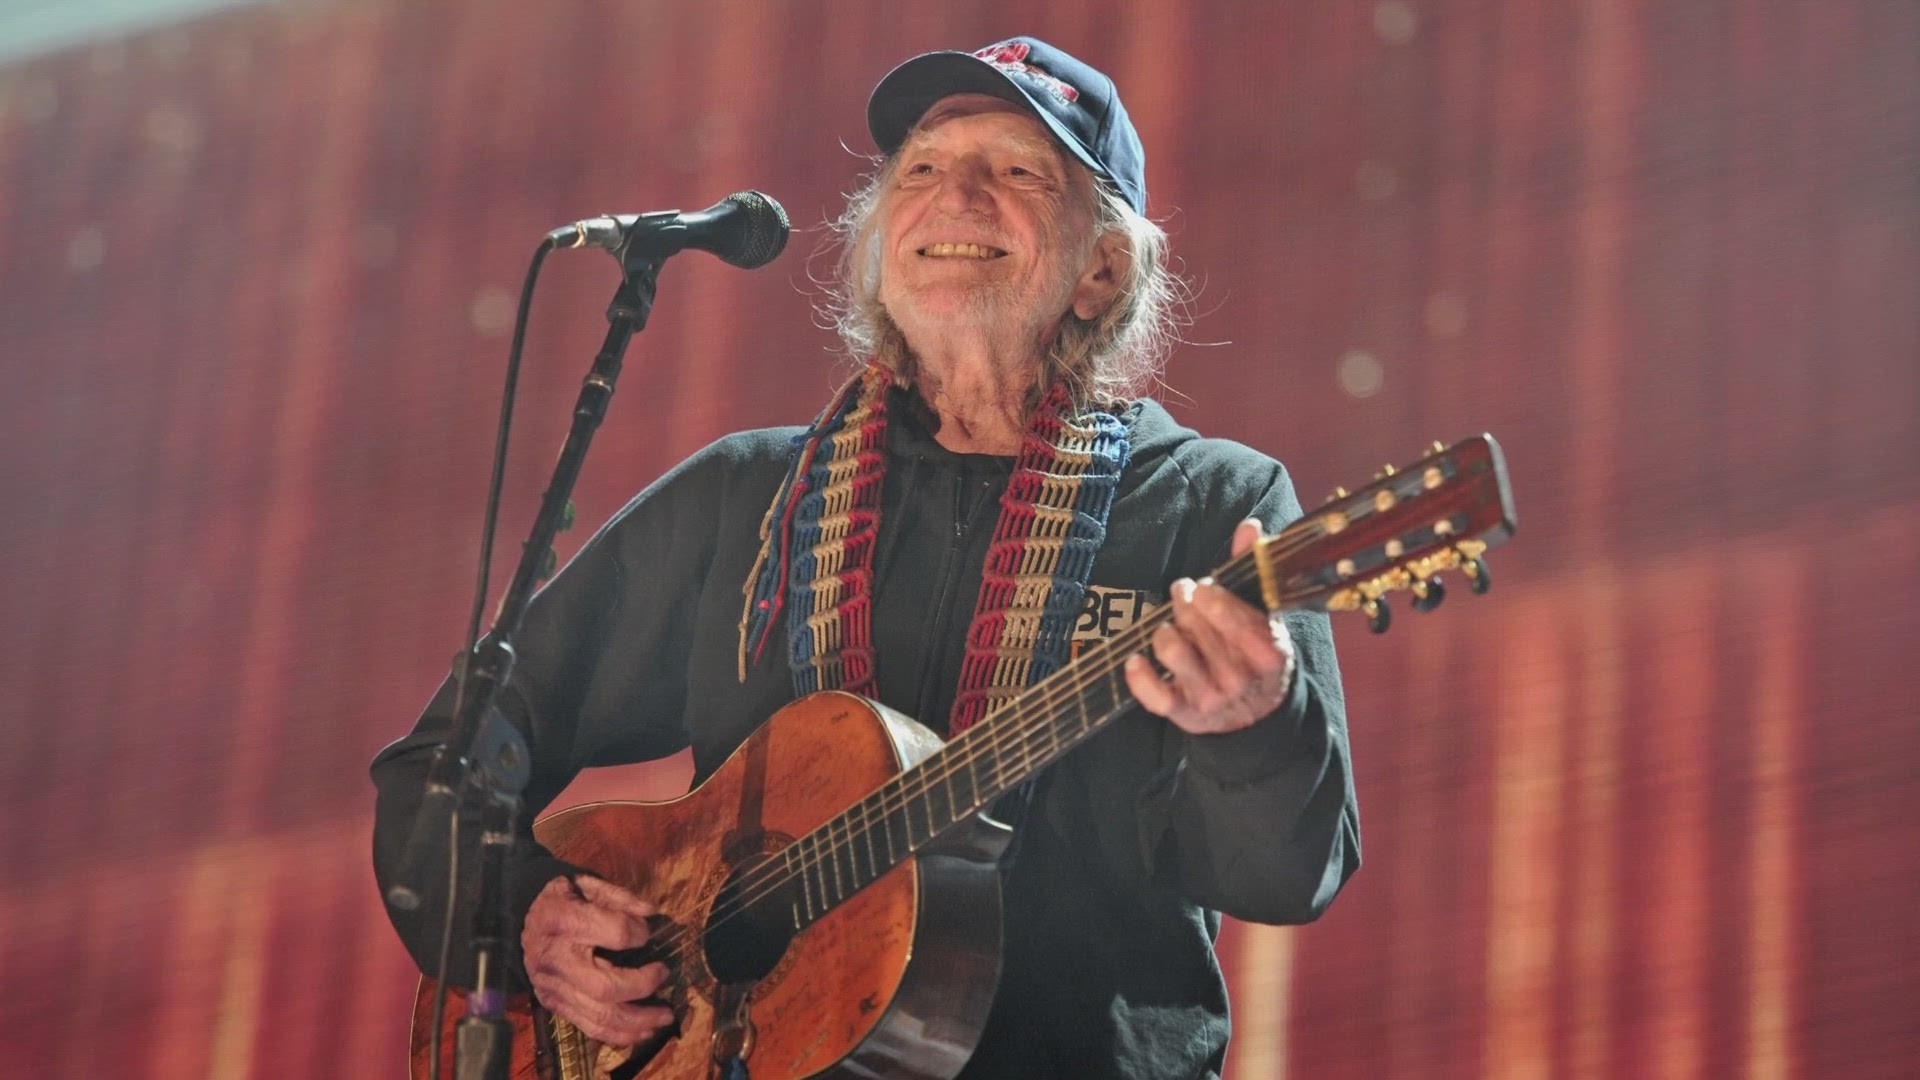 The country music legend will celebrate his 90th birthday with a two-day birthday bash in Los Angeles.